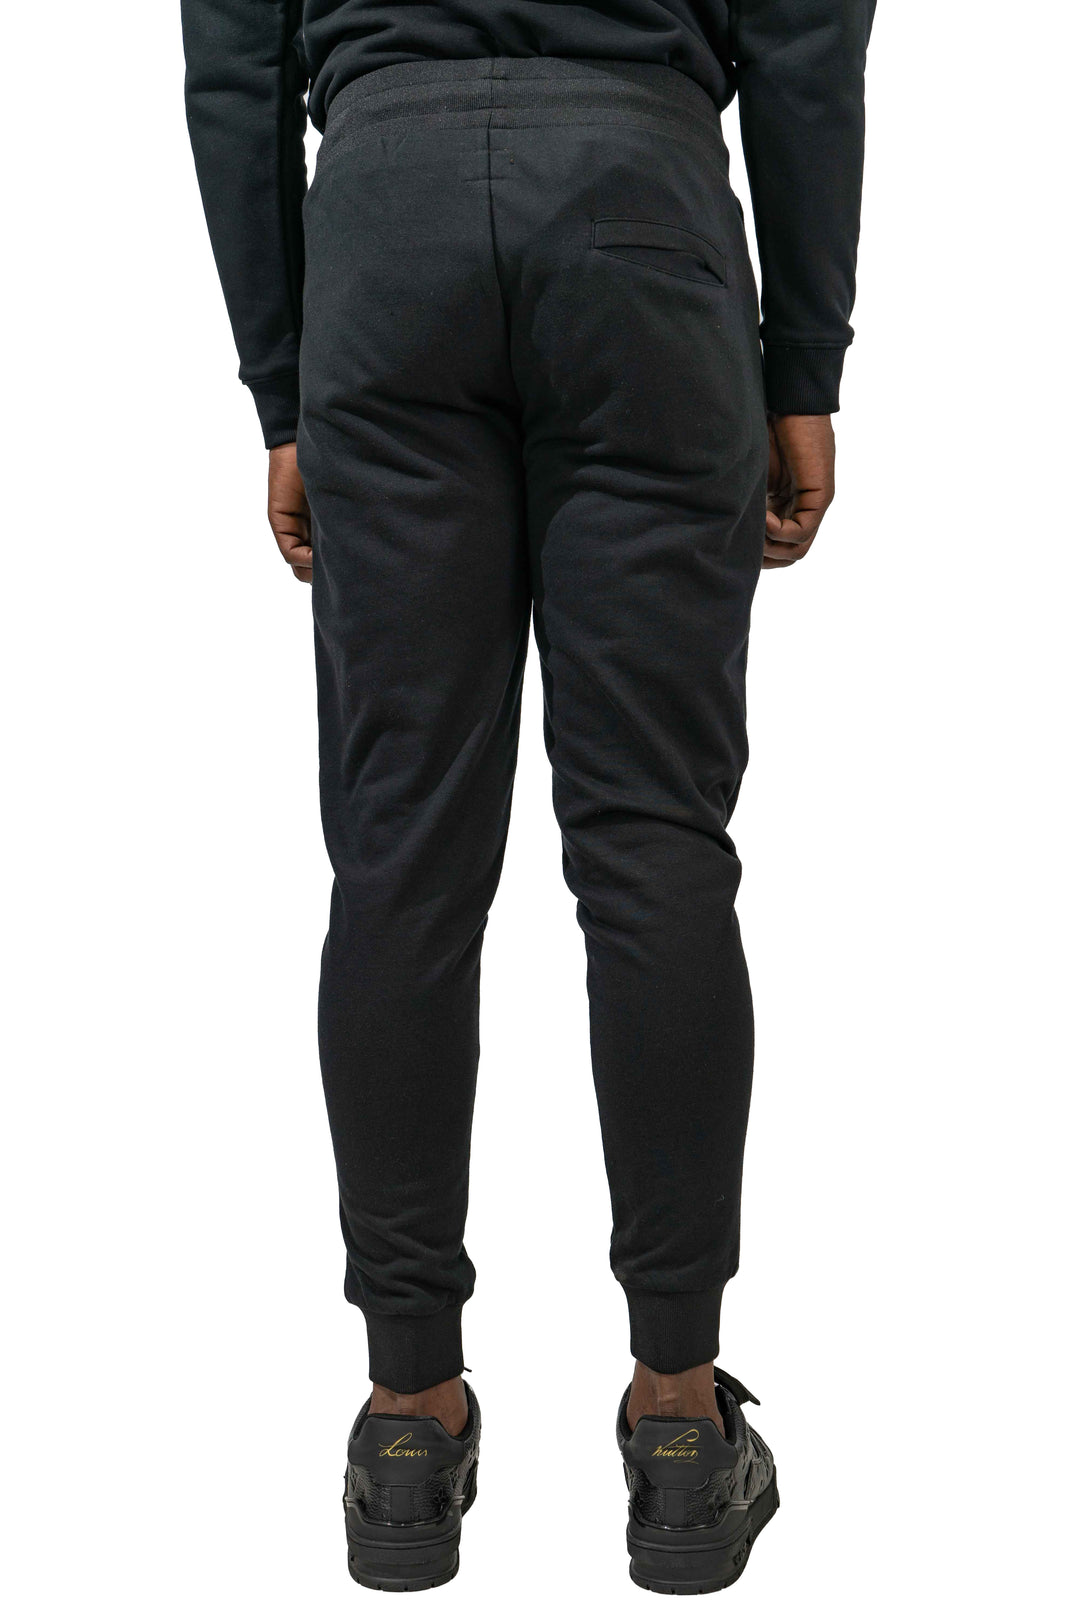 Back To Black Embroidery Knit Jogger